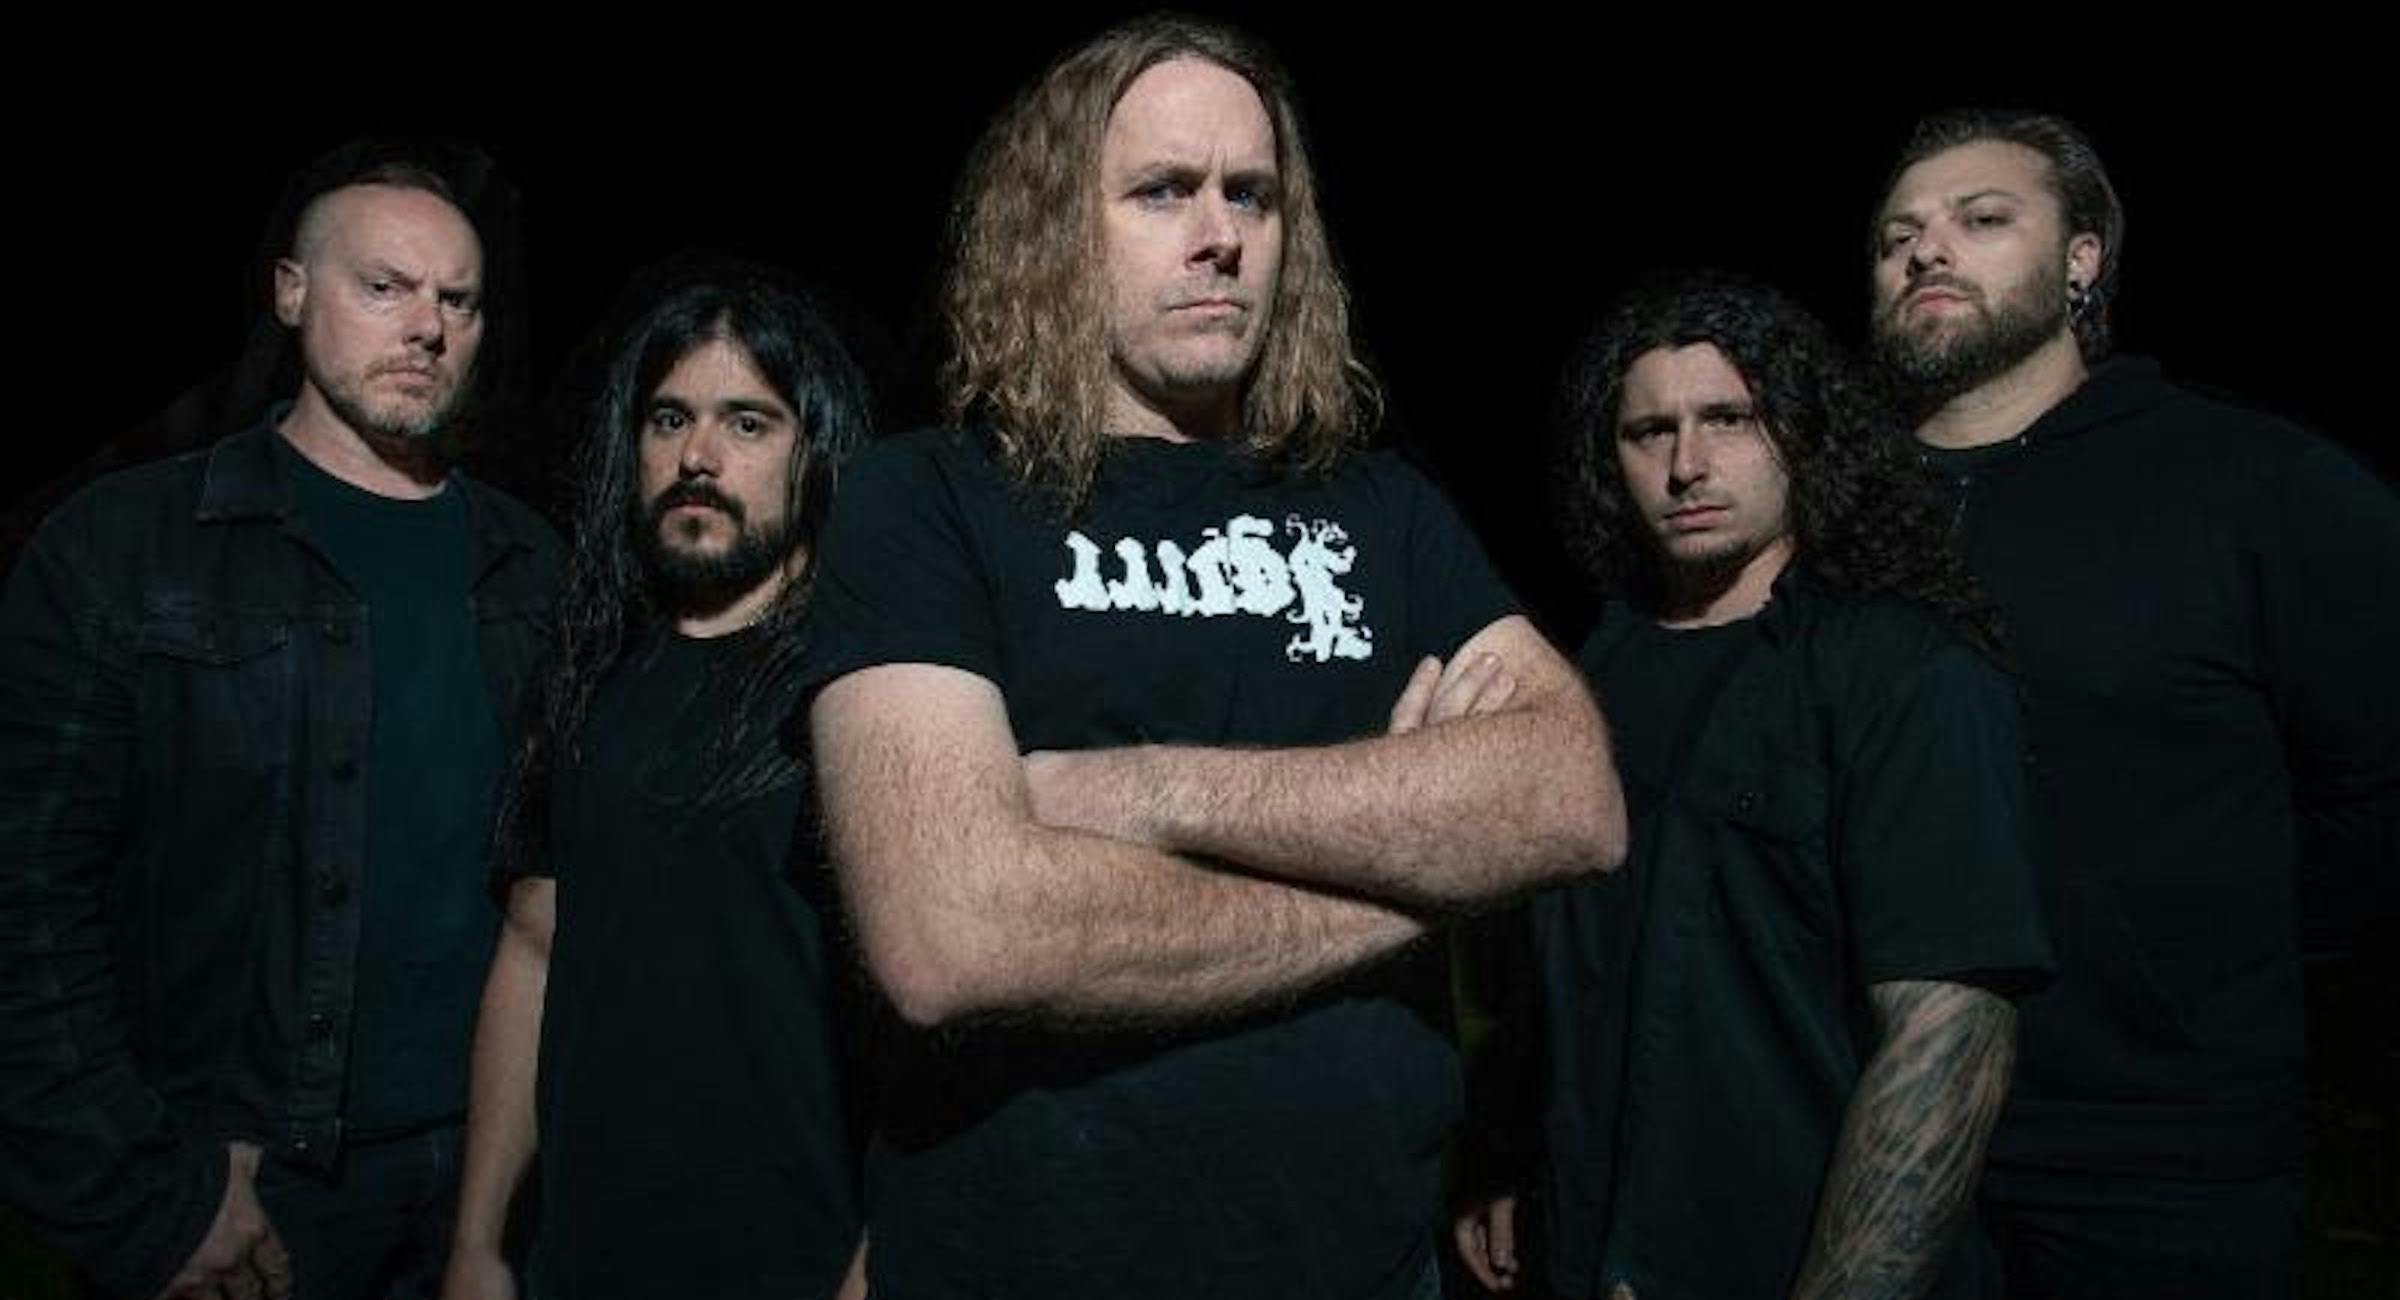 Cattle Decapitation Announce U.S. Tour With Full Of Hell, Atheist, And More